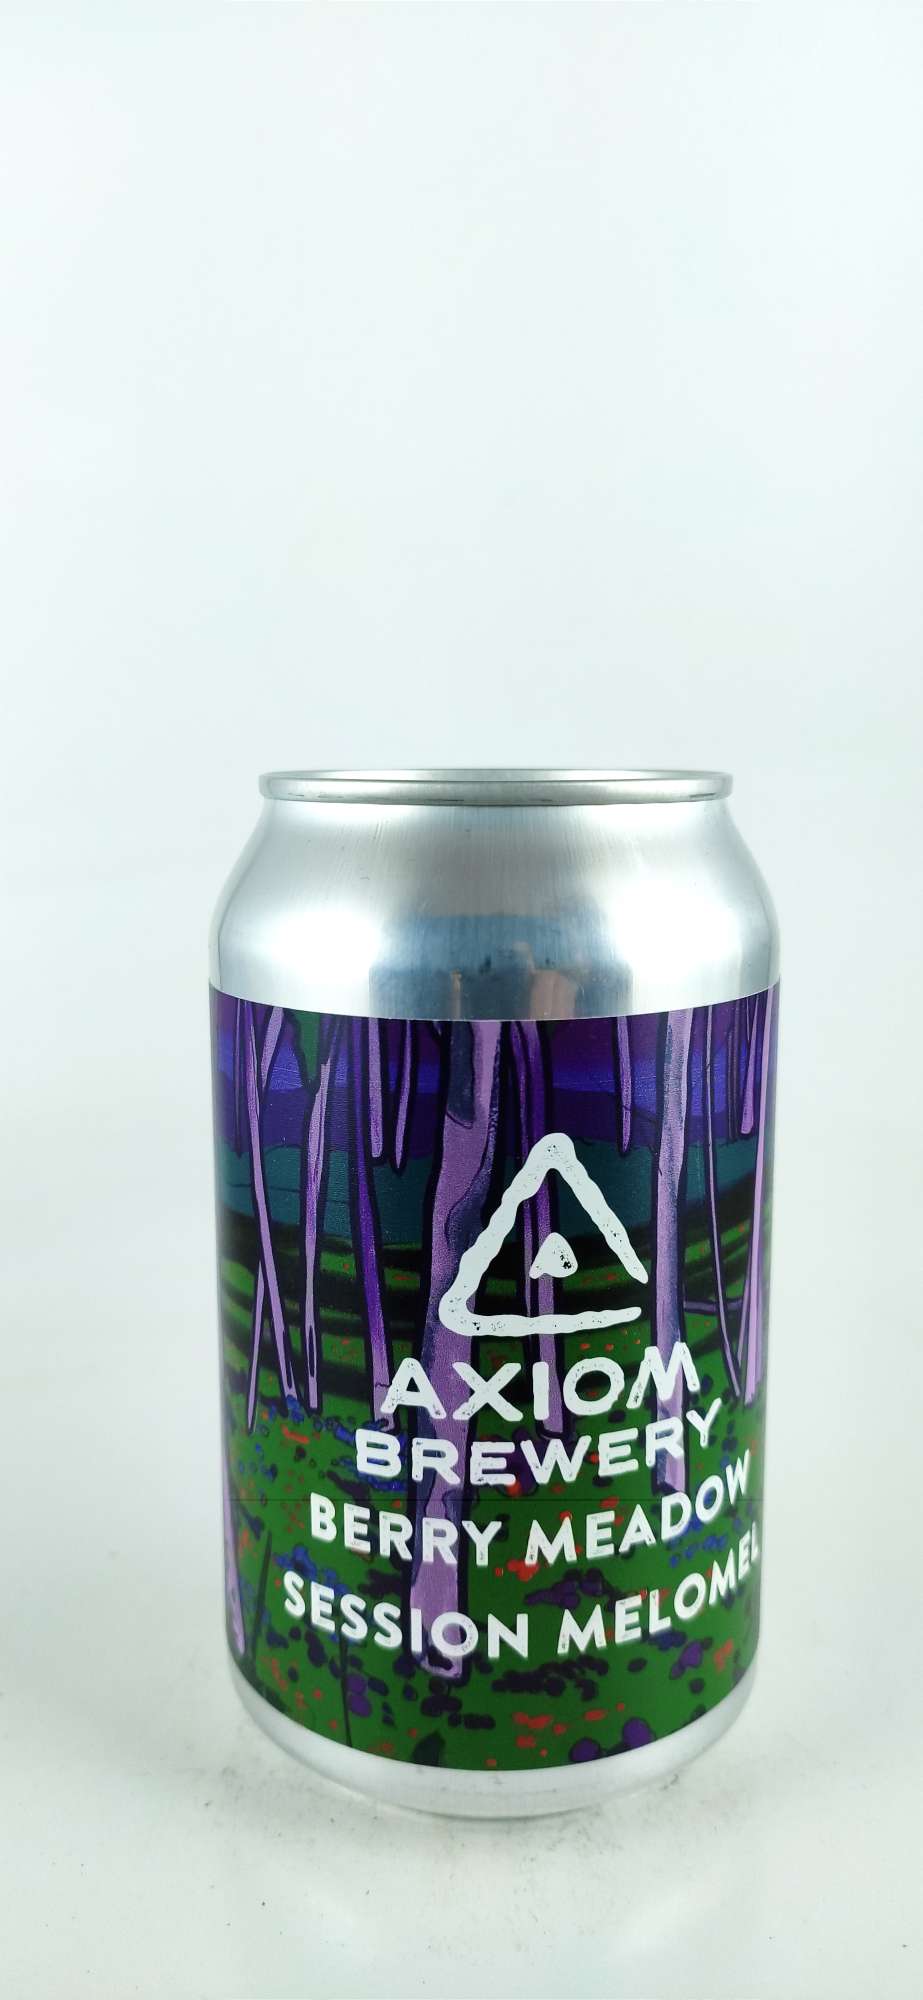 Axiom Berry Medow Session Melomel 15°